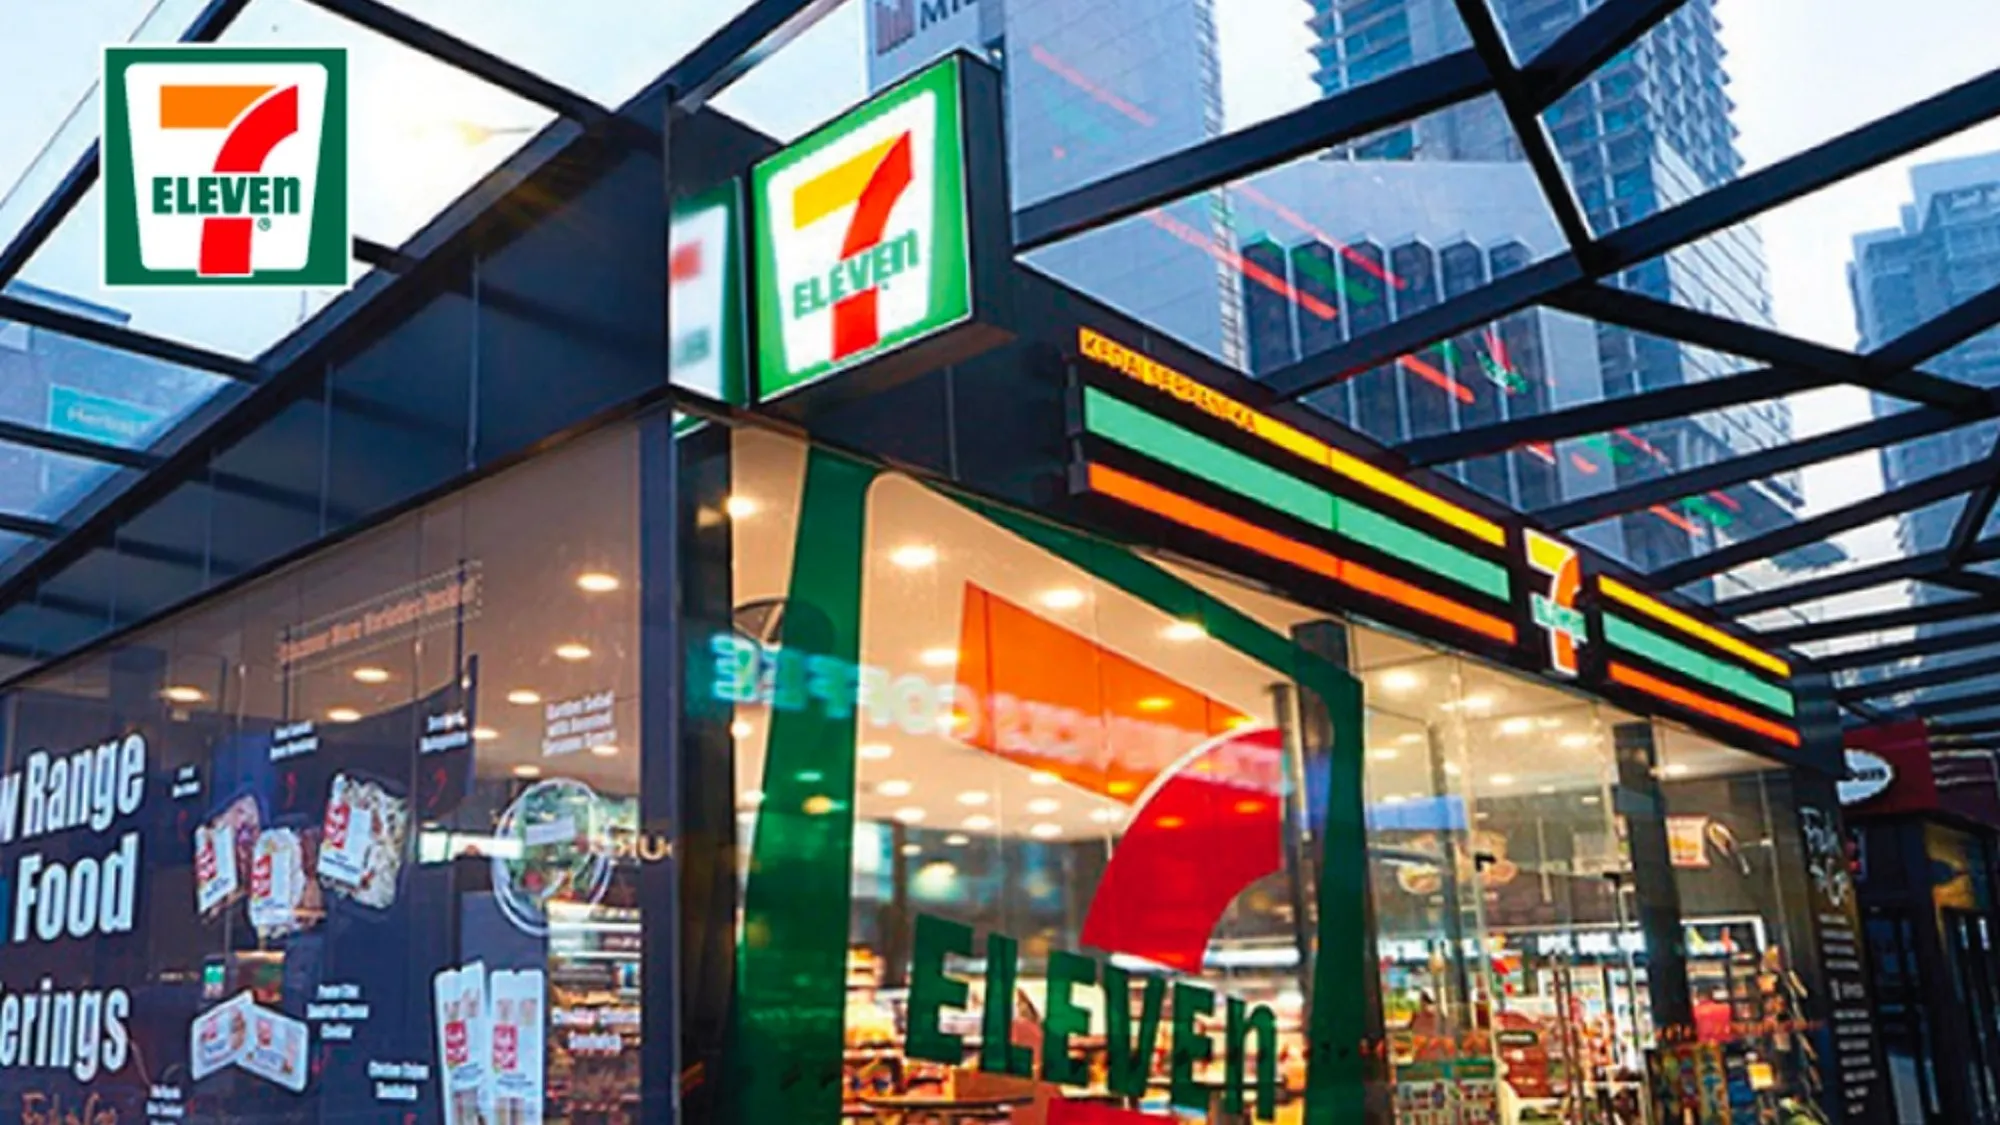 how to pay 7e using shopeepay and 7 eleven vouchers